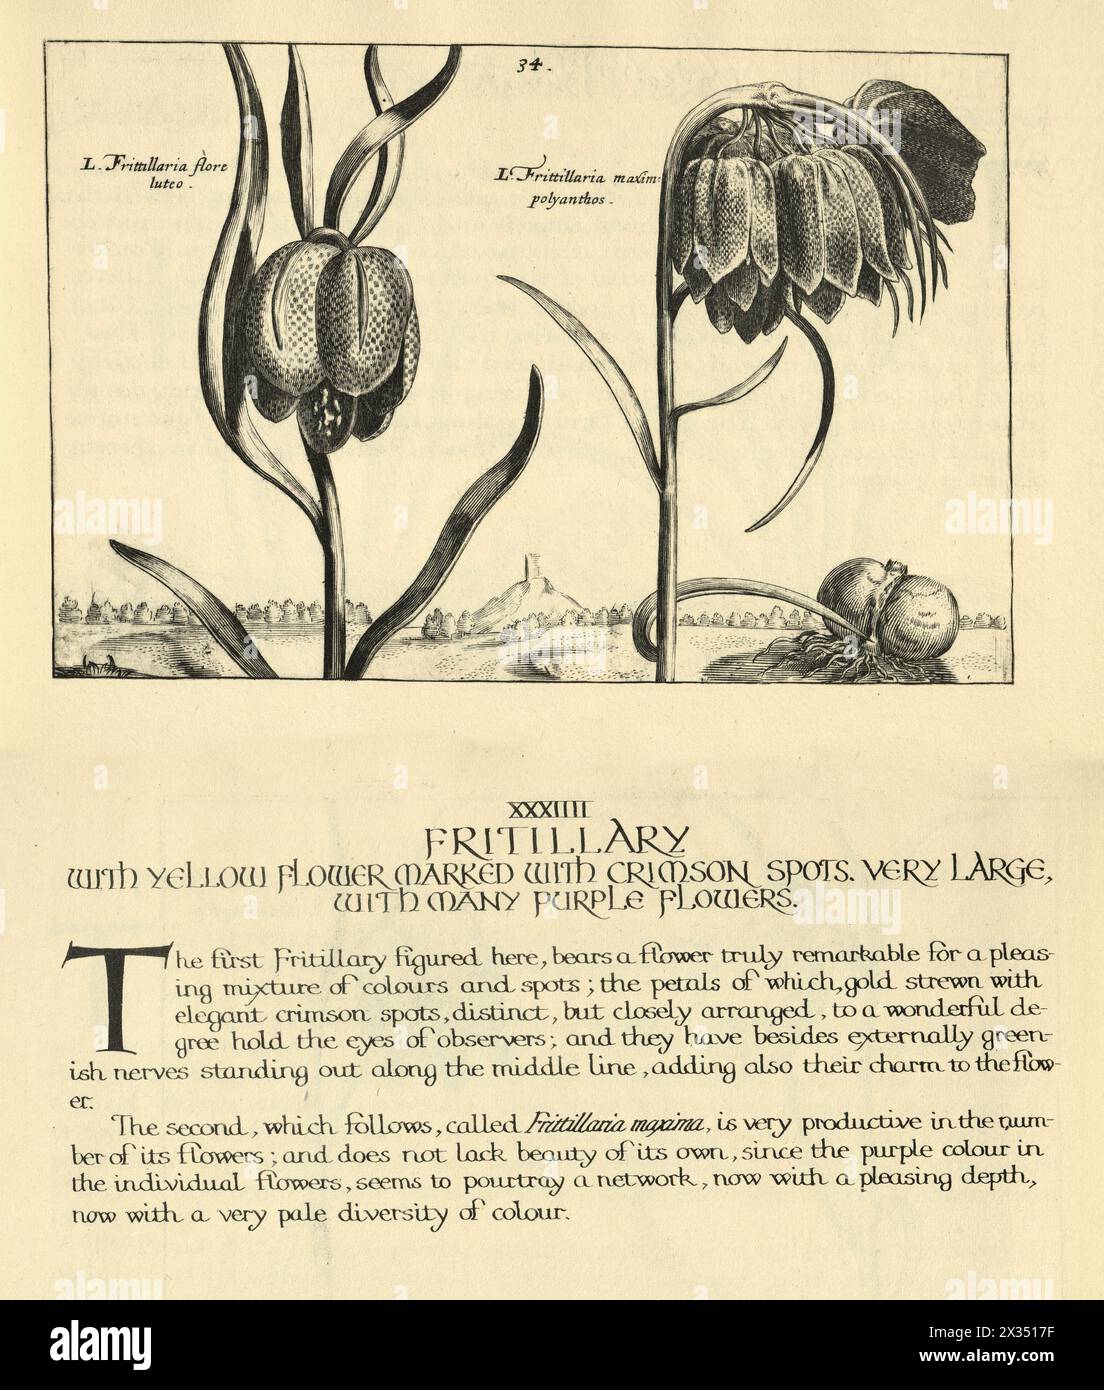 Botanical art print of Fritillary, flowering herbaceous bulbous perennial plants, from Hortus Floridus by Crispin de Passe, Vintage illustration, 17th Century Stock Photo